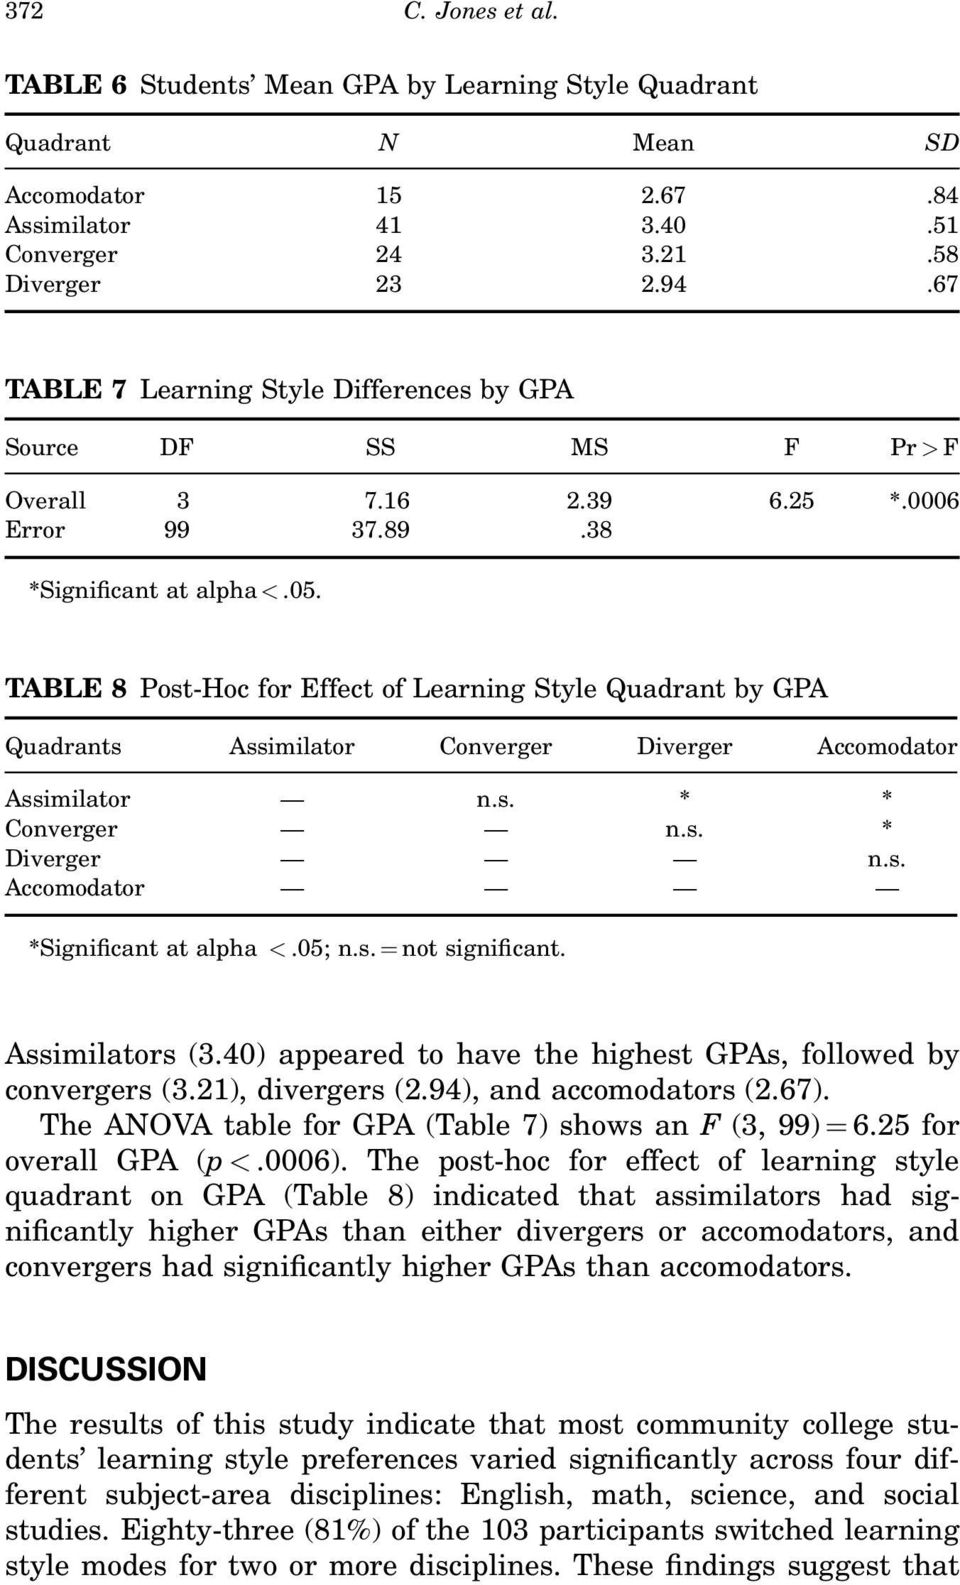 TABLE 8 Post-Hoc for Effect of Learning Style Quadrant by GPA Quadrants Assimilator Converger Diverger Accomodator Assimilator n.s. * * Converger n.s. * Diverger n.s. Accomodator *Significant at alpha <.